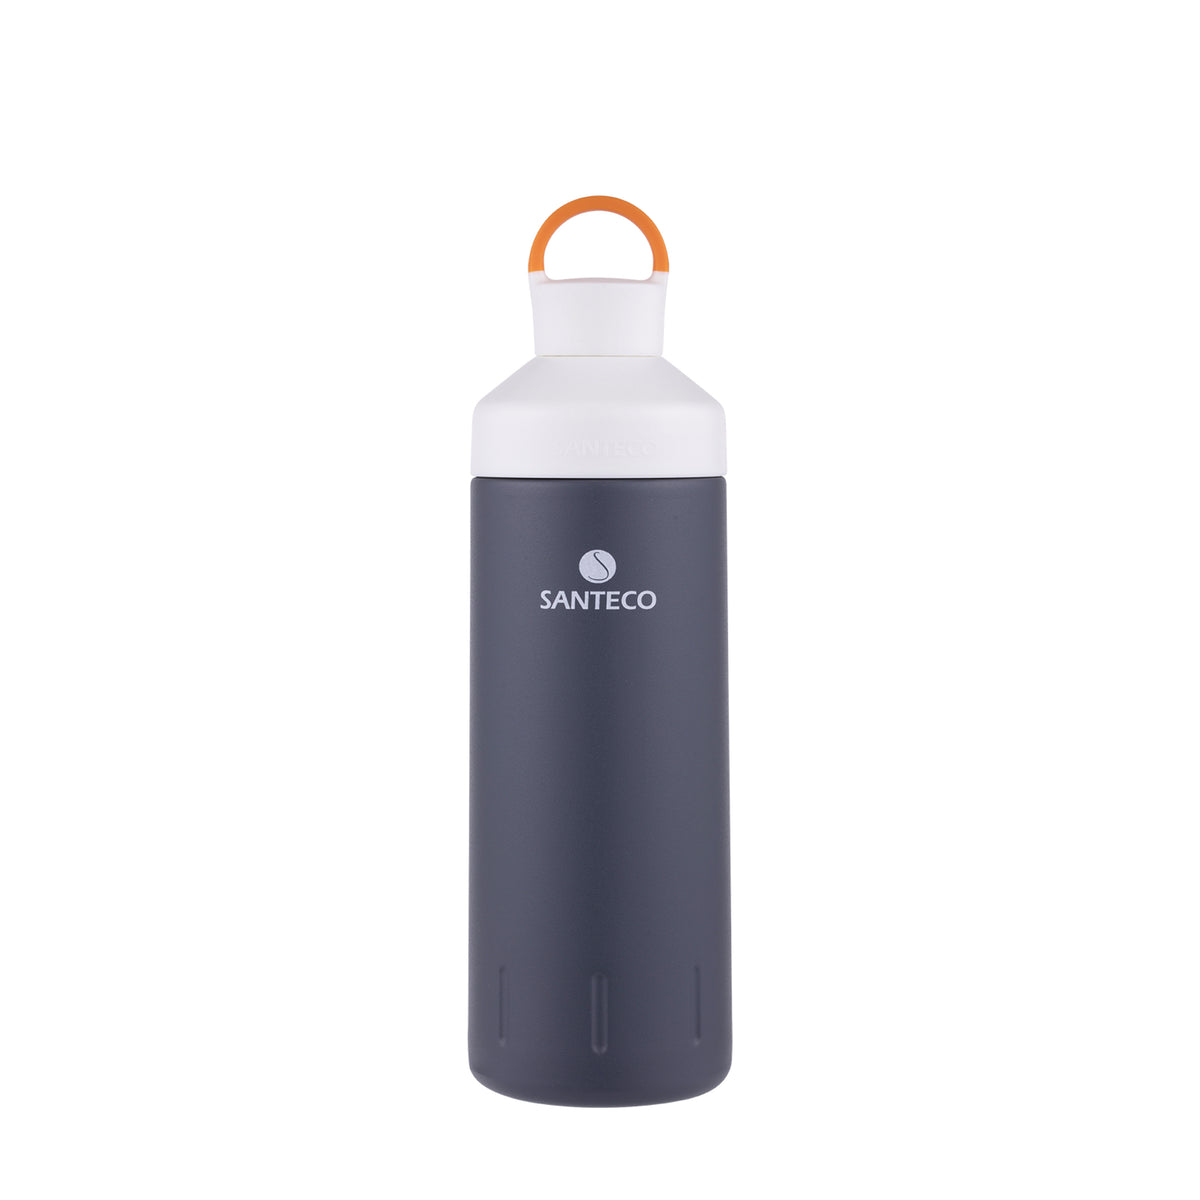 SANTECO water bottle 24 oz (about 680.4 ml), vacuum insulation stainless  steel bottle, with straw handle cap, leak-proof bottle, wide mouth and easy